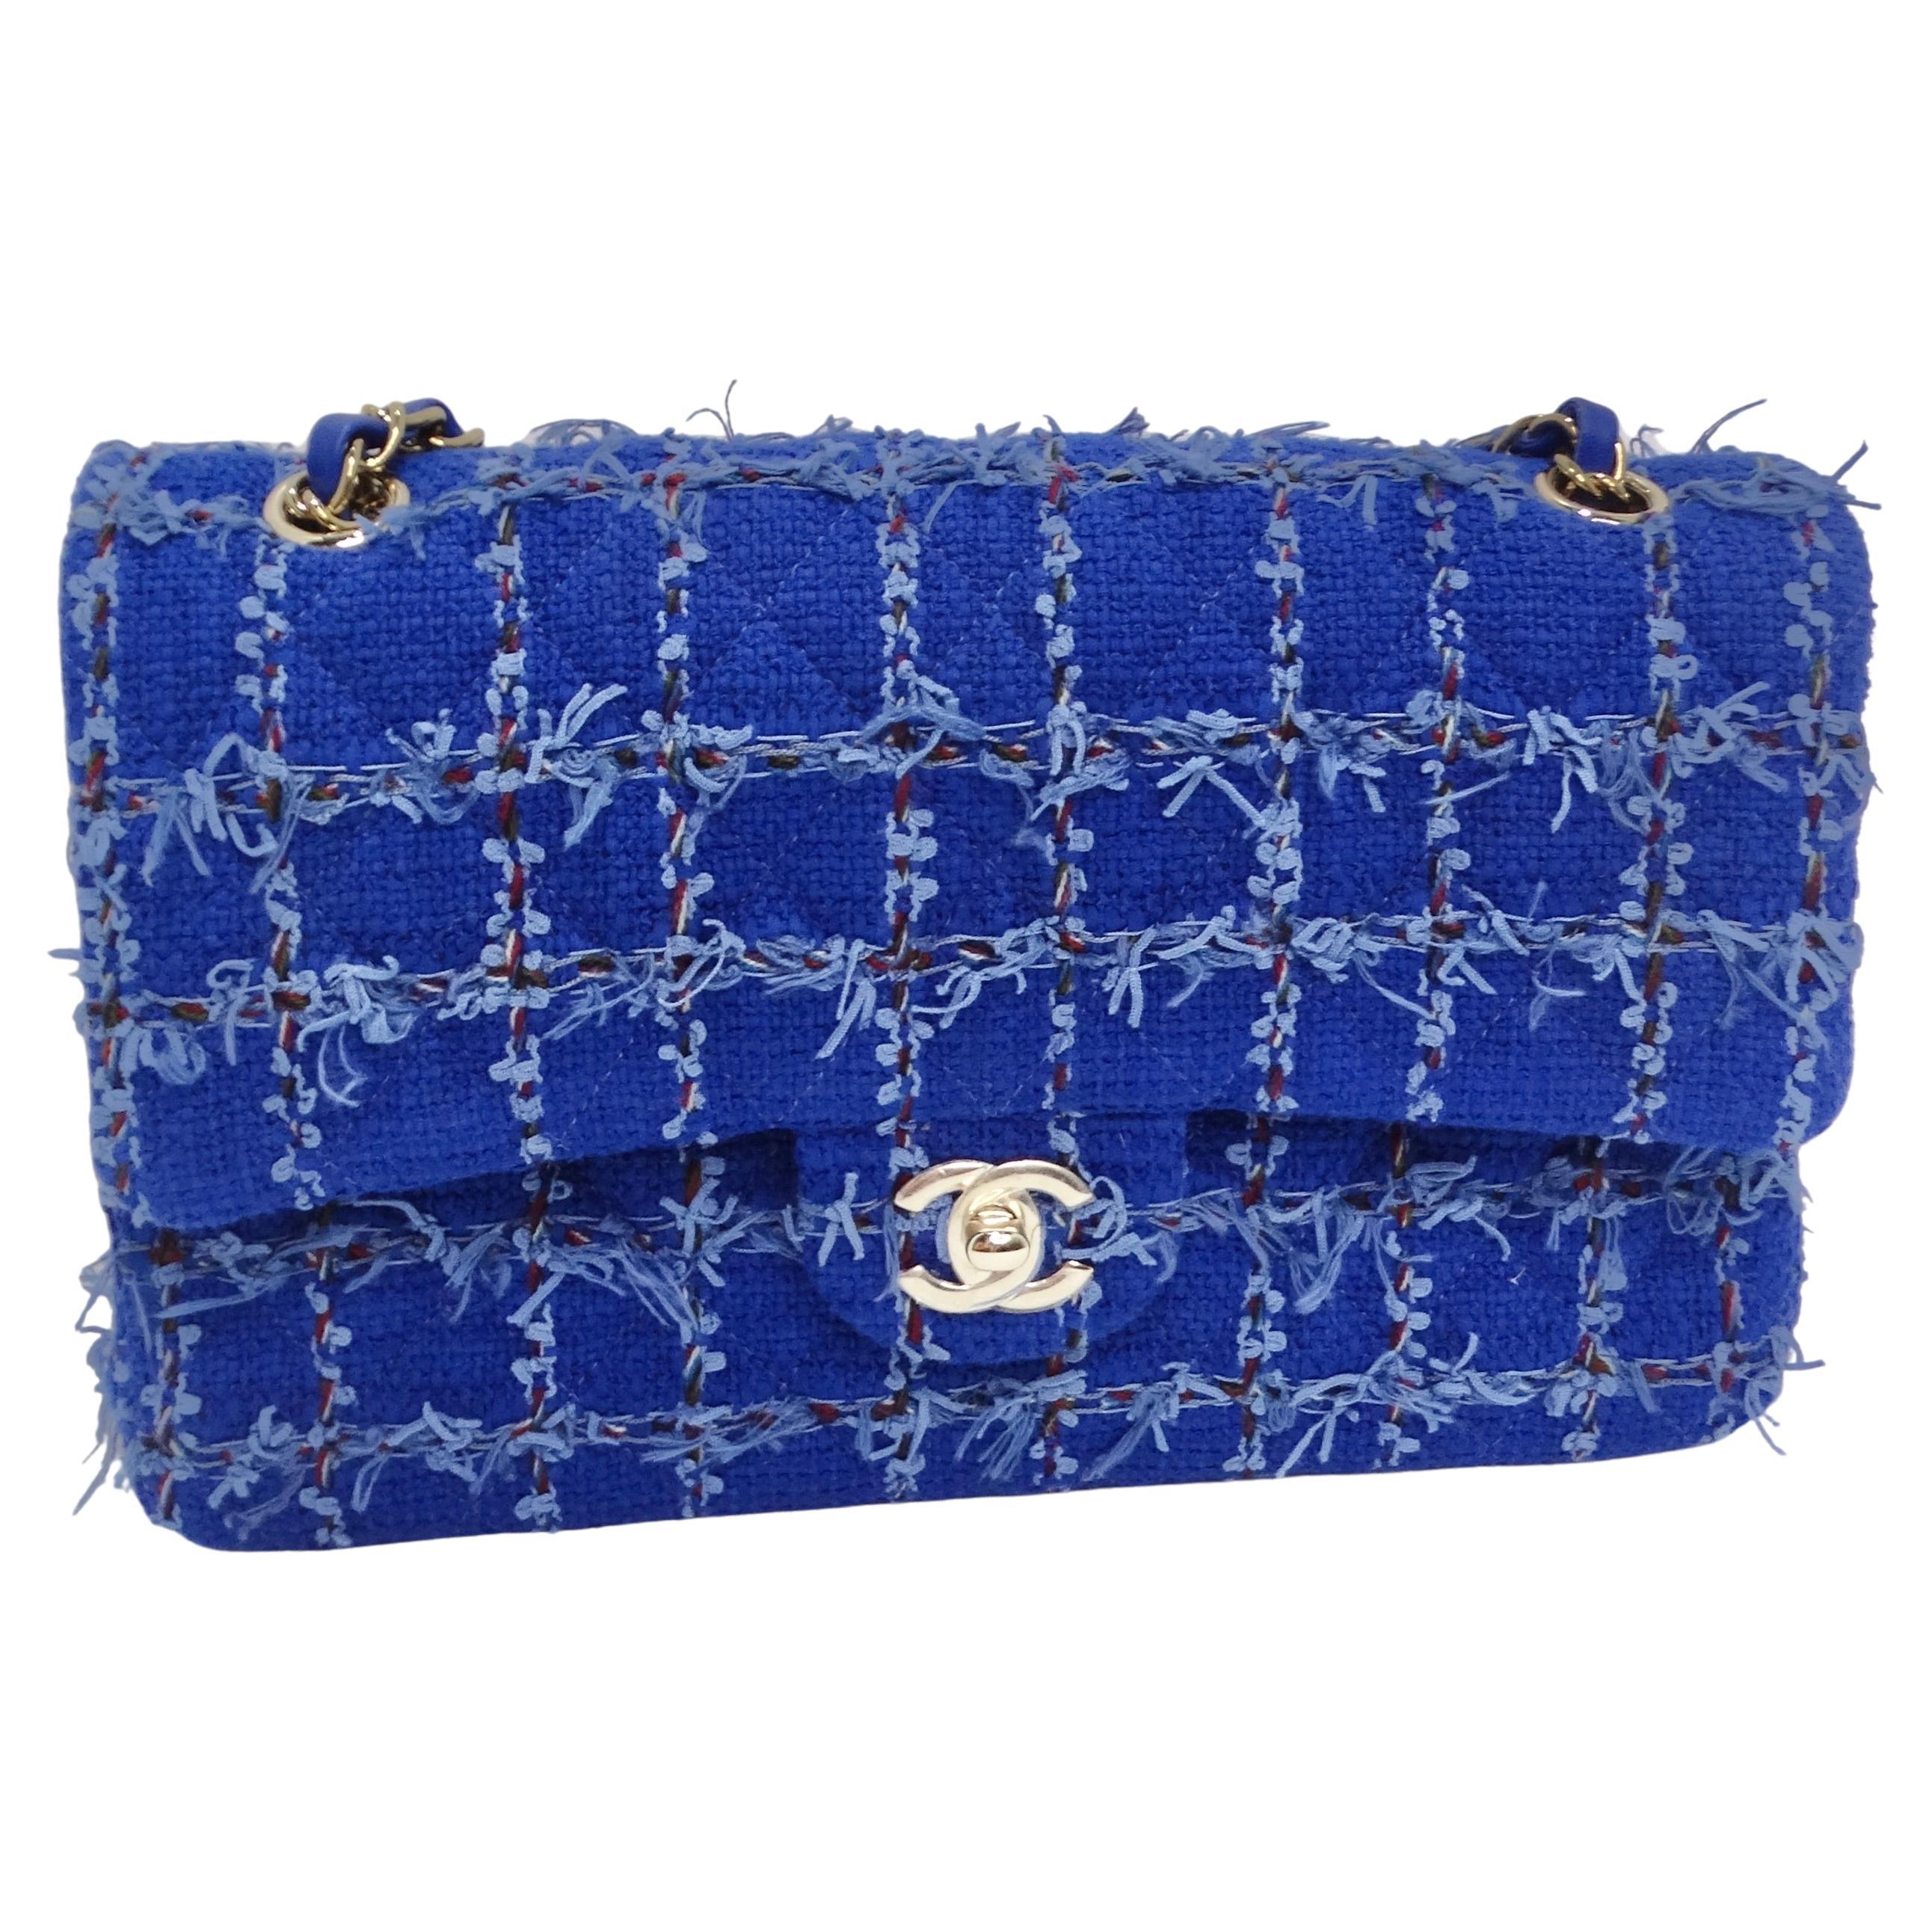 
Introducing the Chanel Blue Tweed Quilted Small Classic Flap Bag, a masterpiece of fashion that effortlessly combines elegance and style. This stunning small crossbody shoulder bag is a testament to Chanel's impeccable design. Crafted with